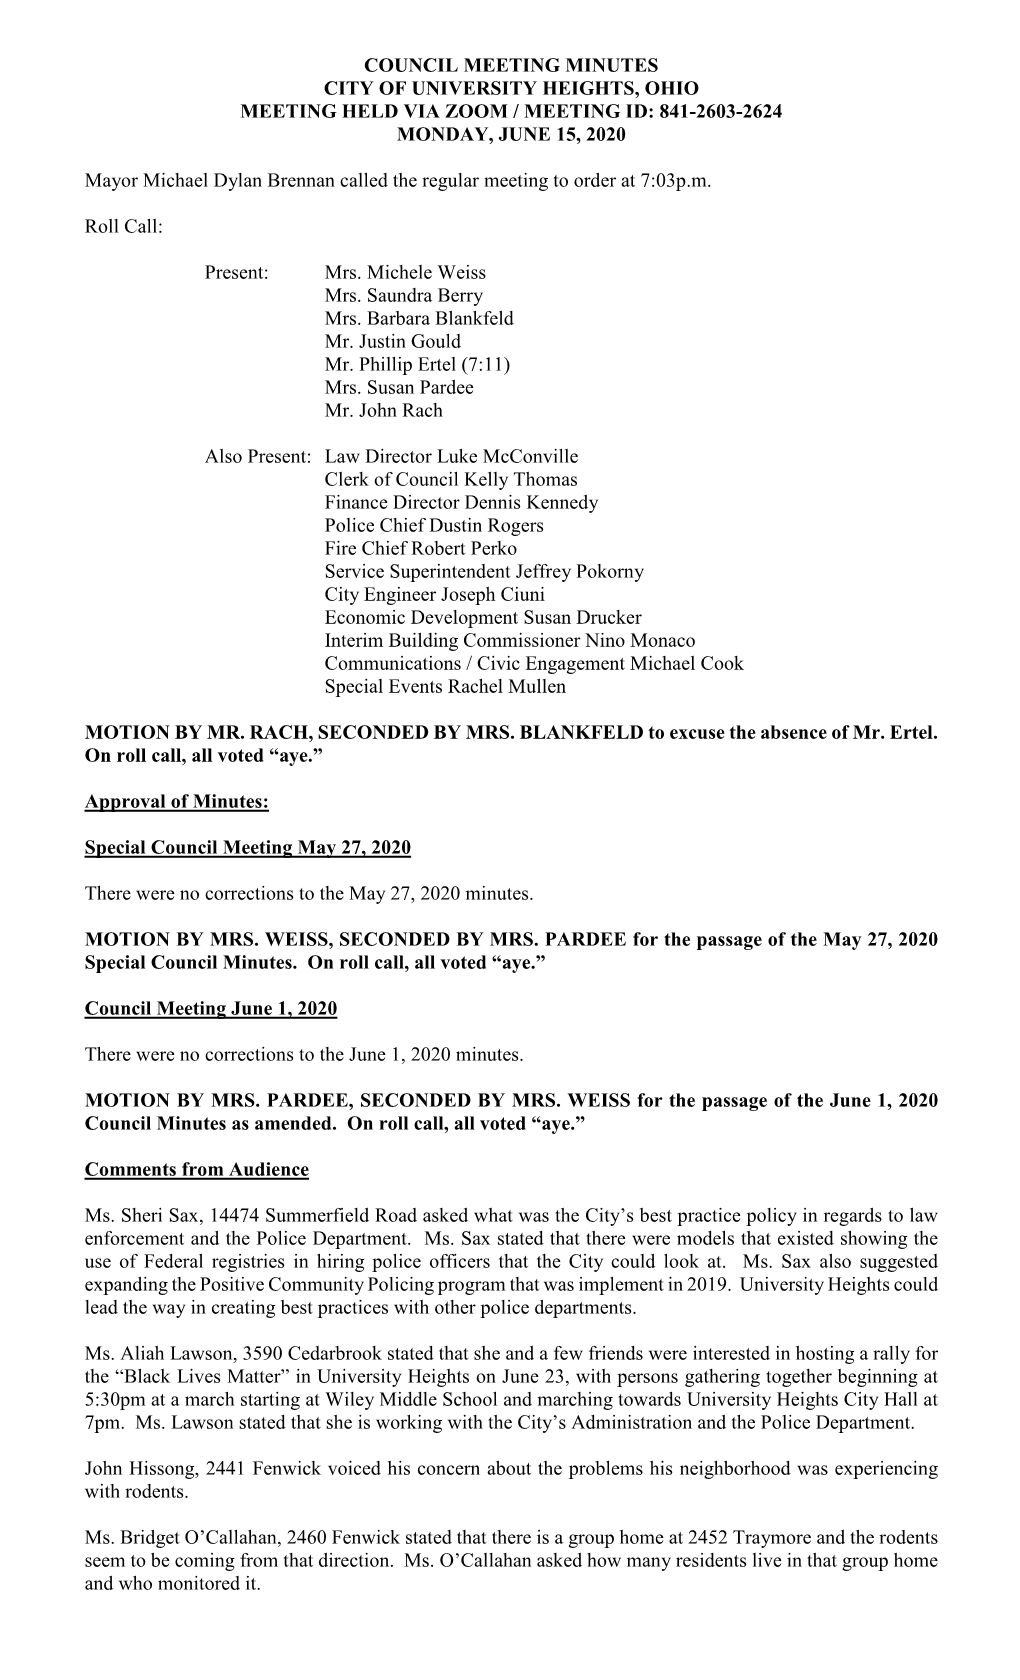 Council Meeting Minutes City of University Heights, Ohio Meeting Held Via Zoom / Meeting Id: 841-2603-2624 Monday, June 15, 2020